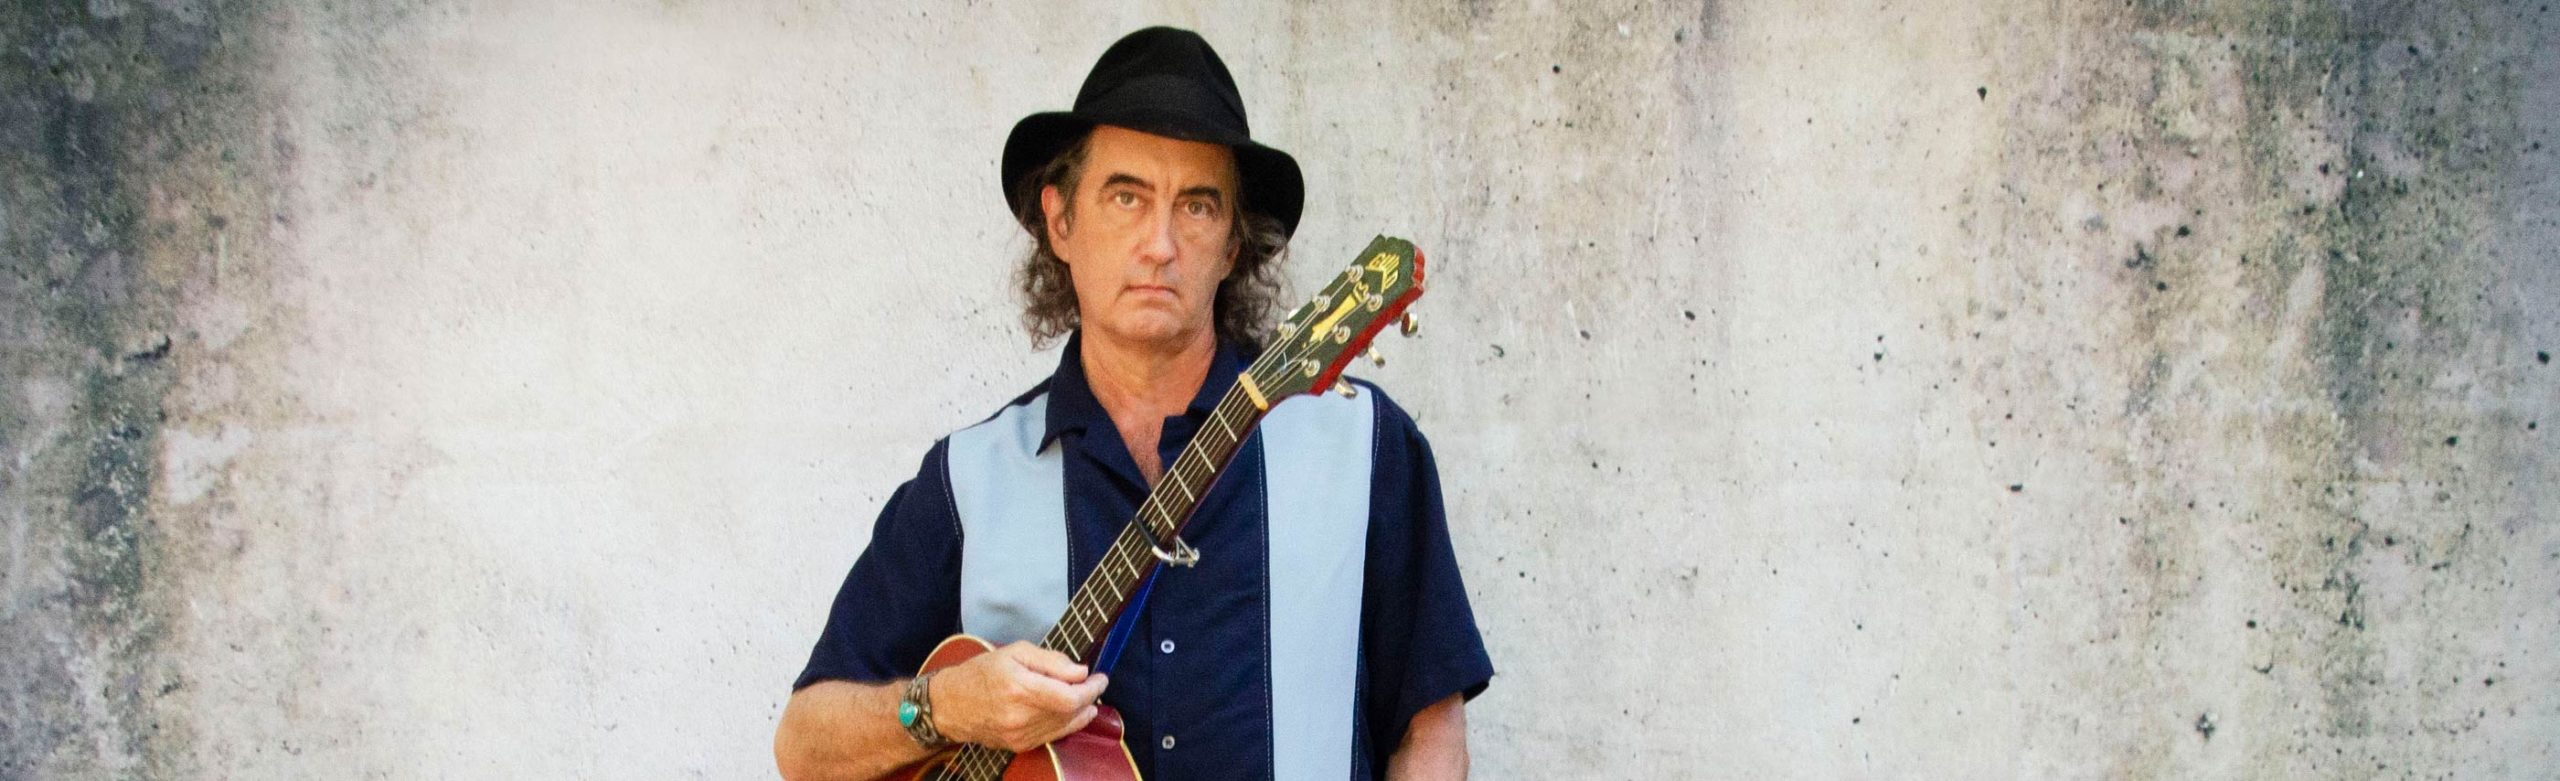 James McMurtry Confirms Bozeman Concert in Fall 2022 Image